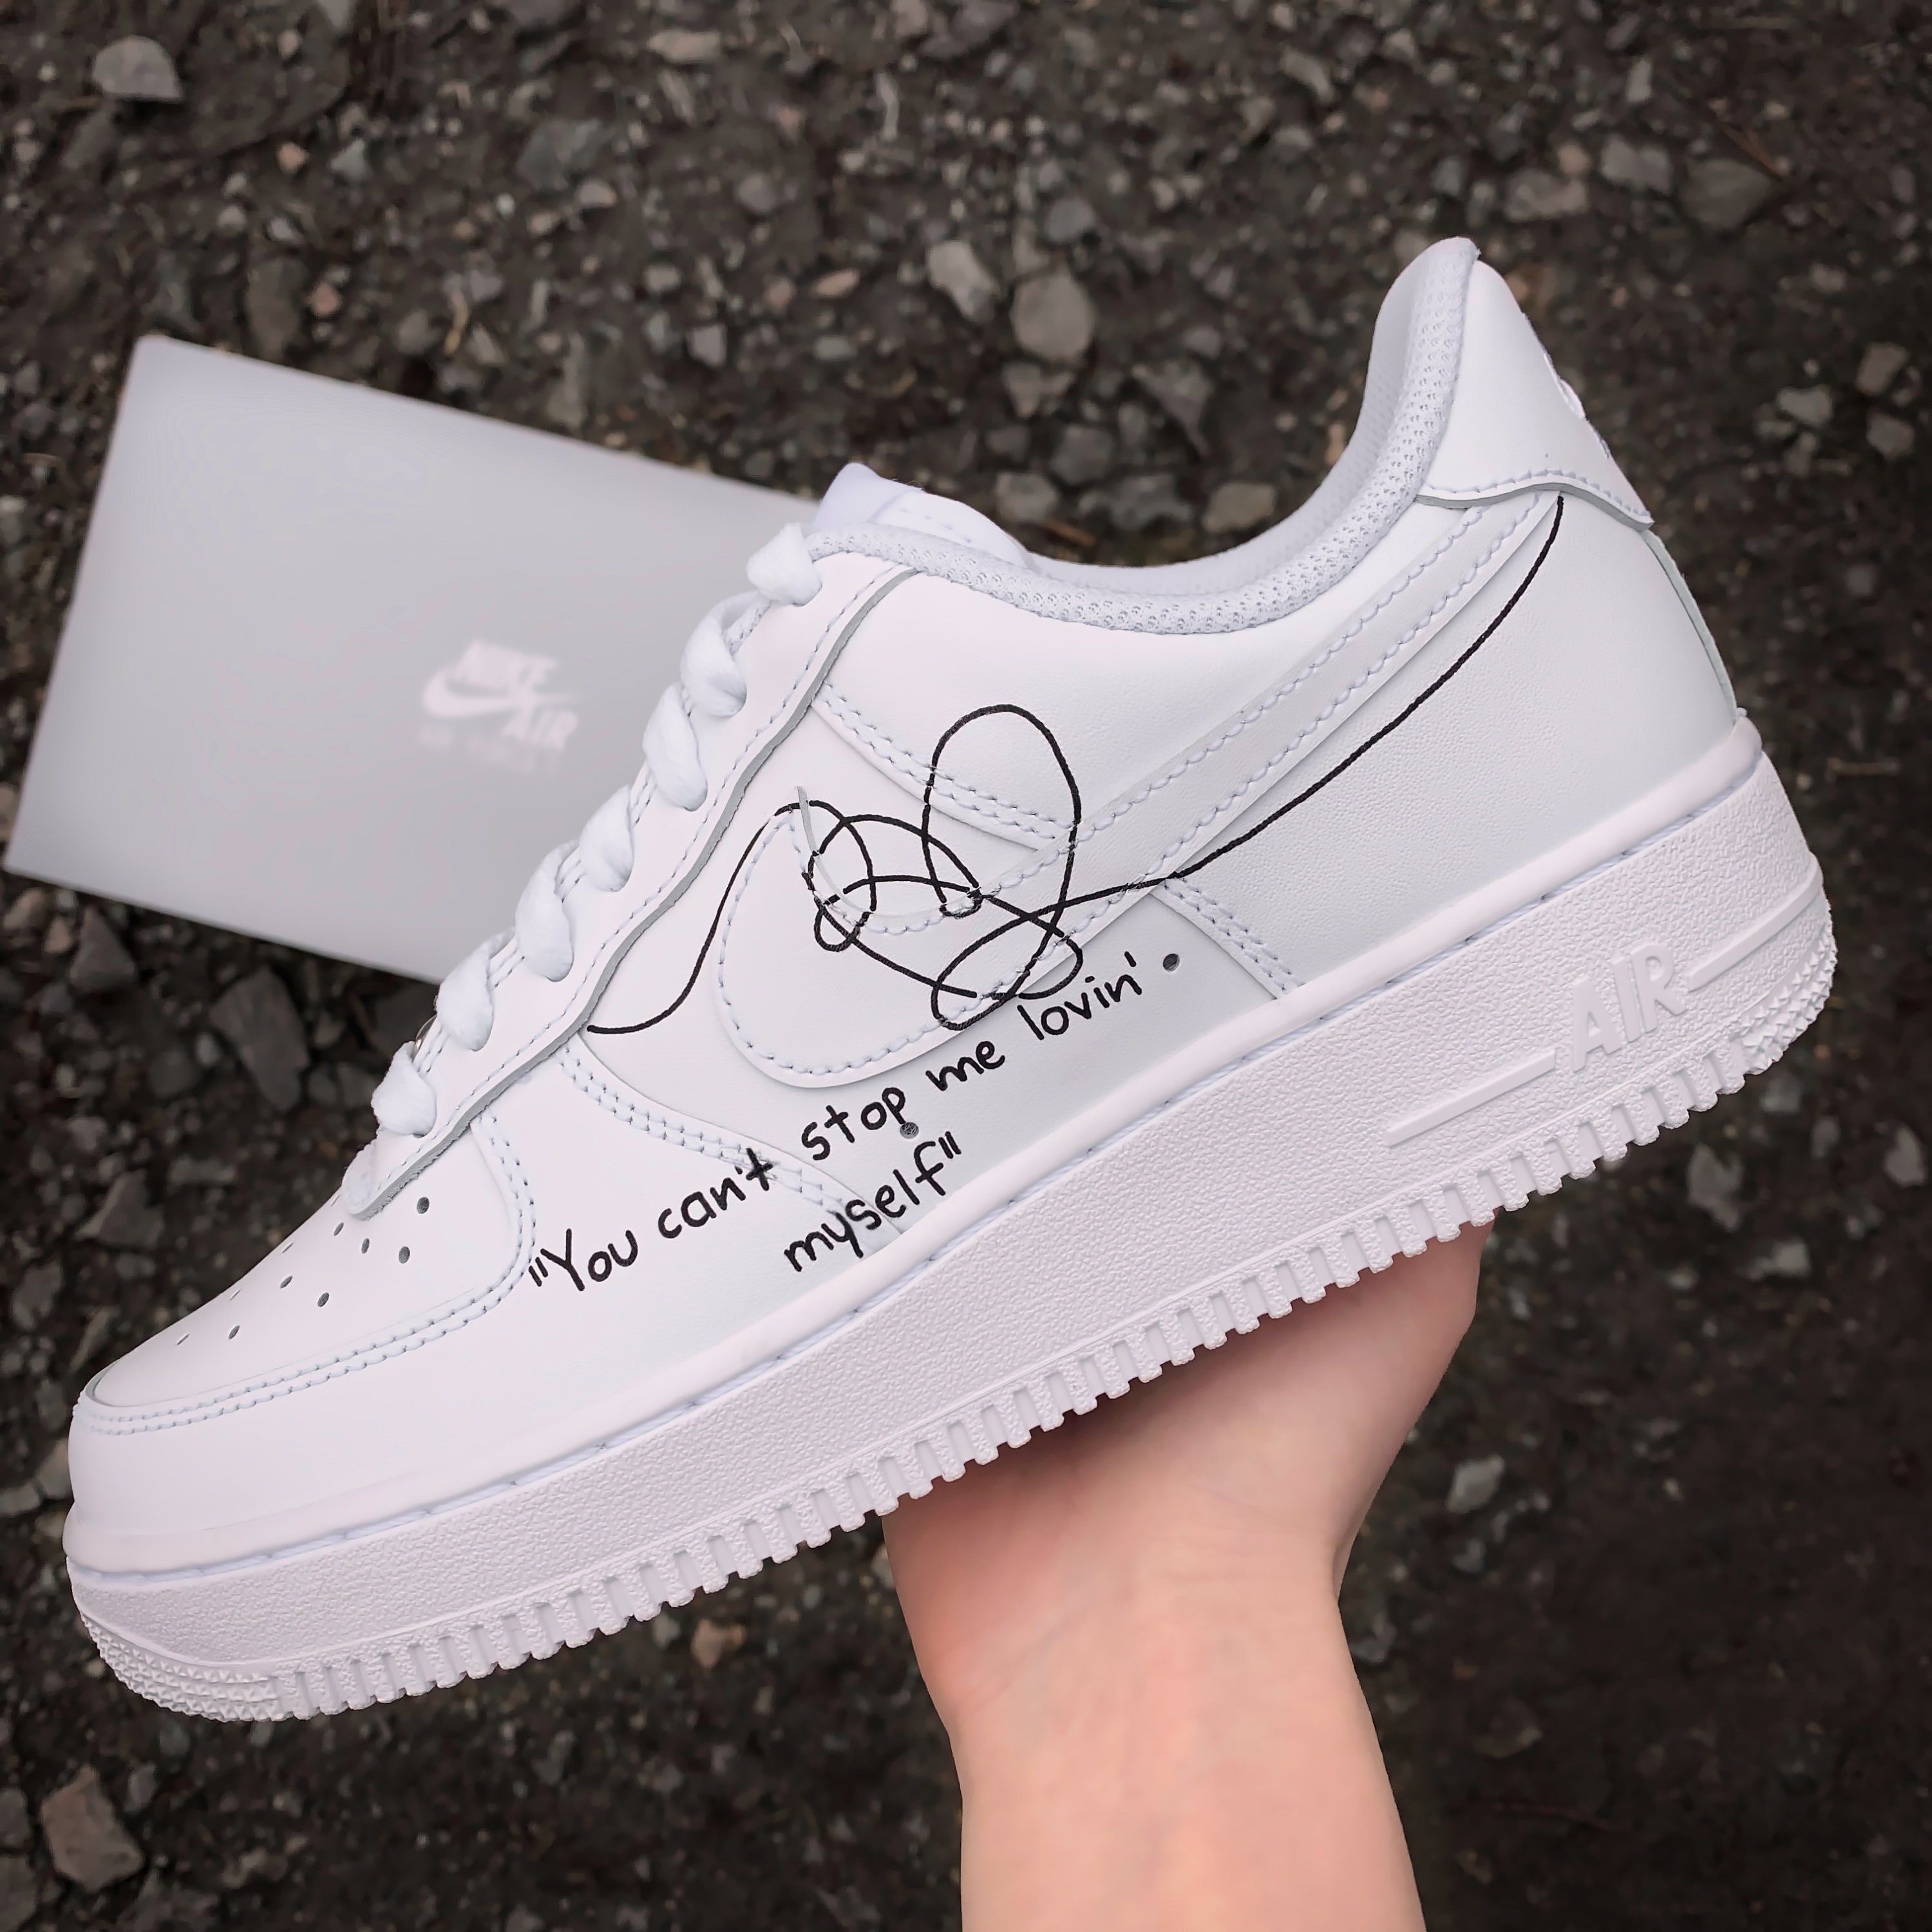 ARMY's BTS x Nike Merch Is Too Good Not To Be Official - Koreaboo